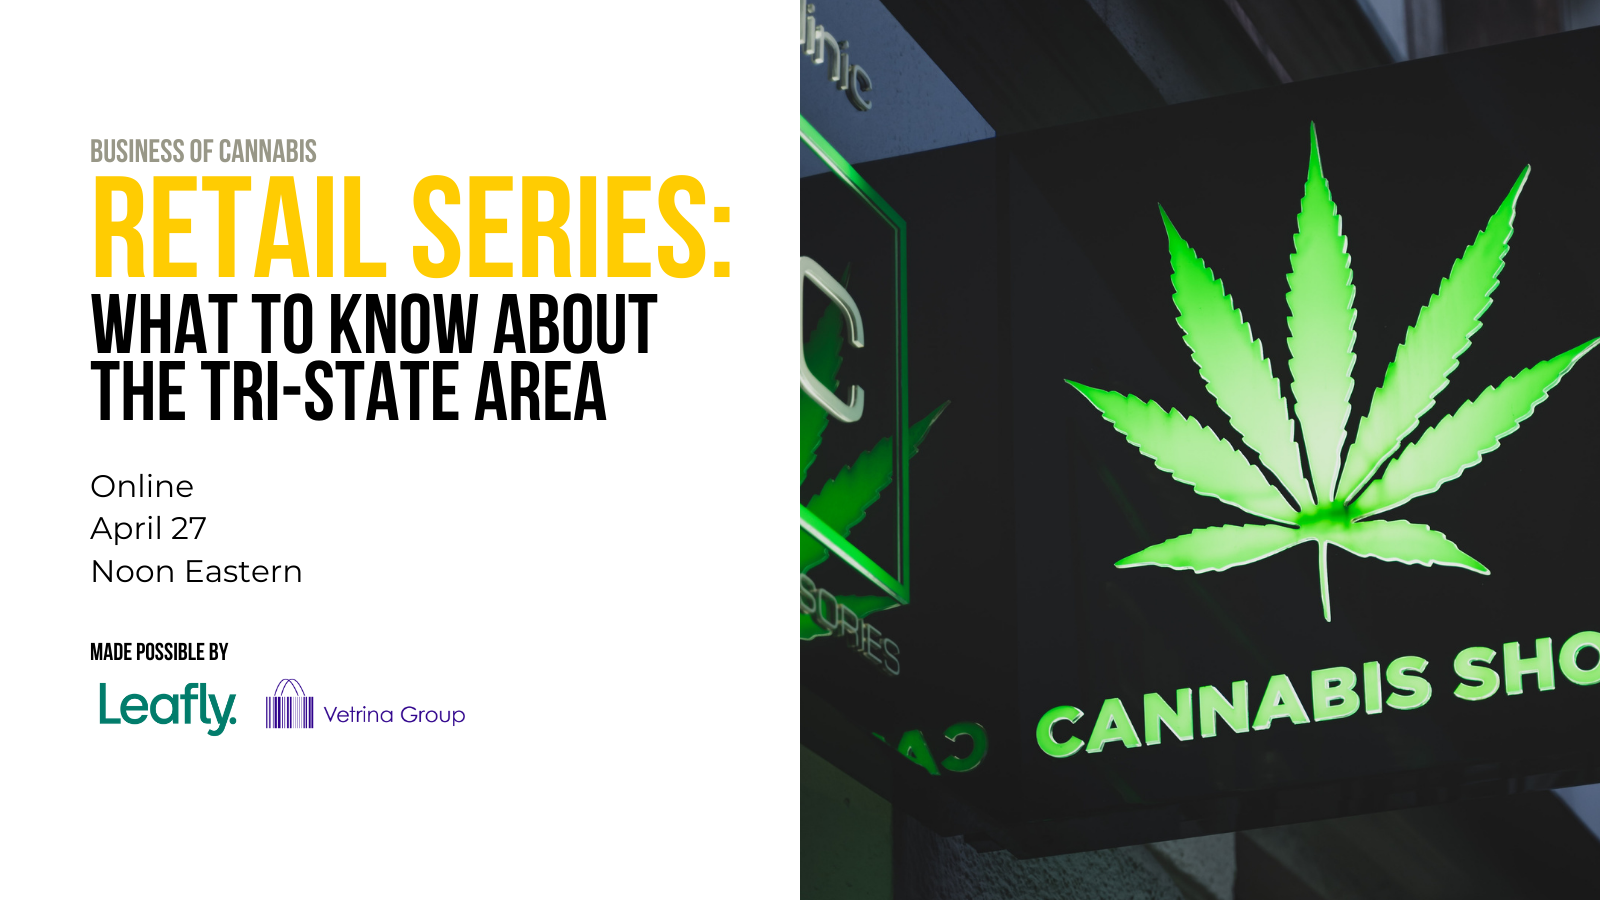 cannabis industry event focused on the tri-state area cannabis retail